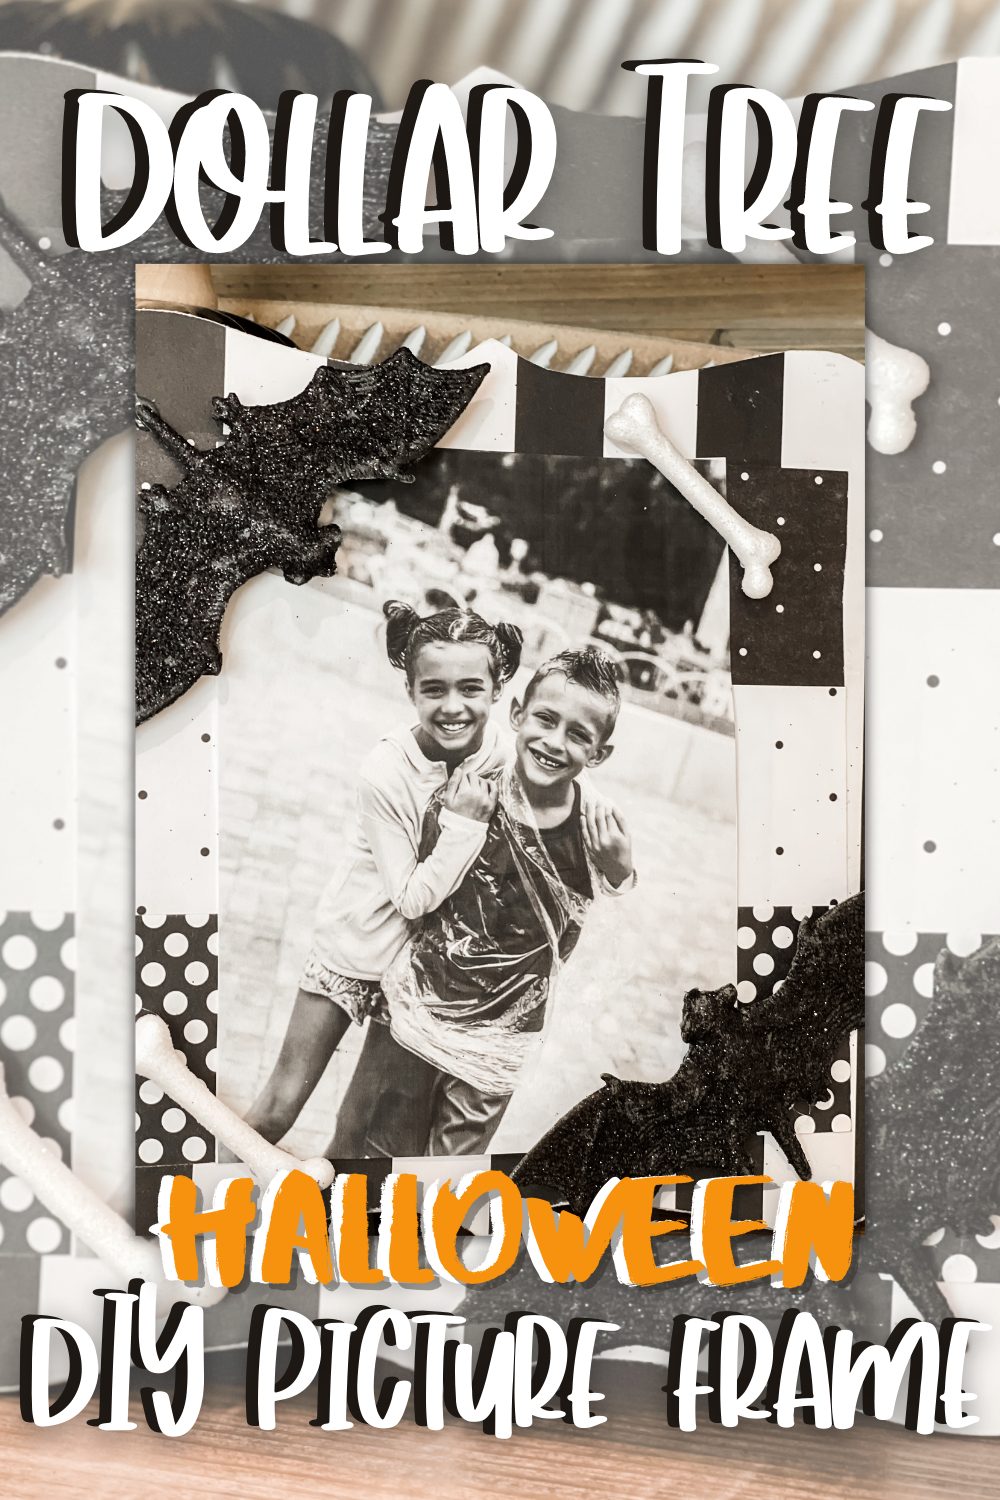 DIY Dollar Tree Halloween Picture Frame - Re-Fabbed